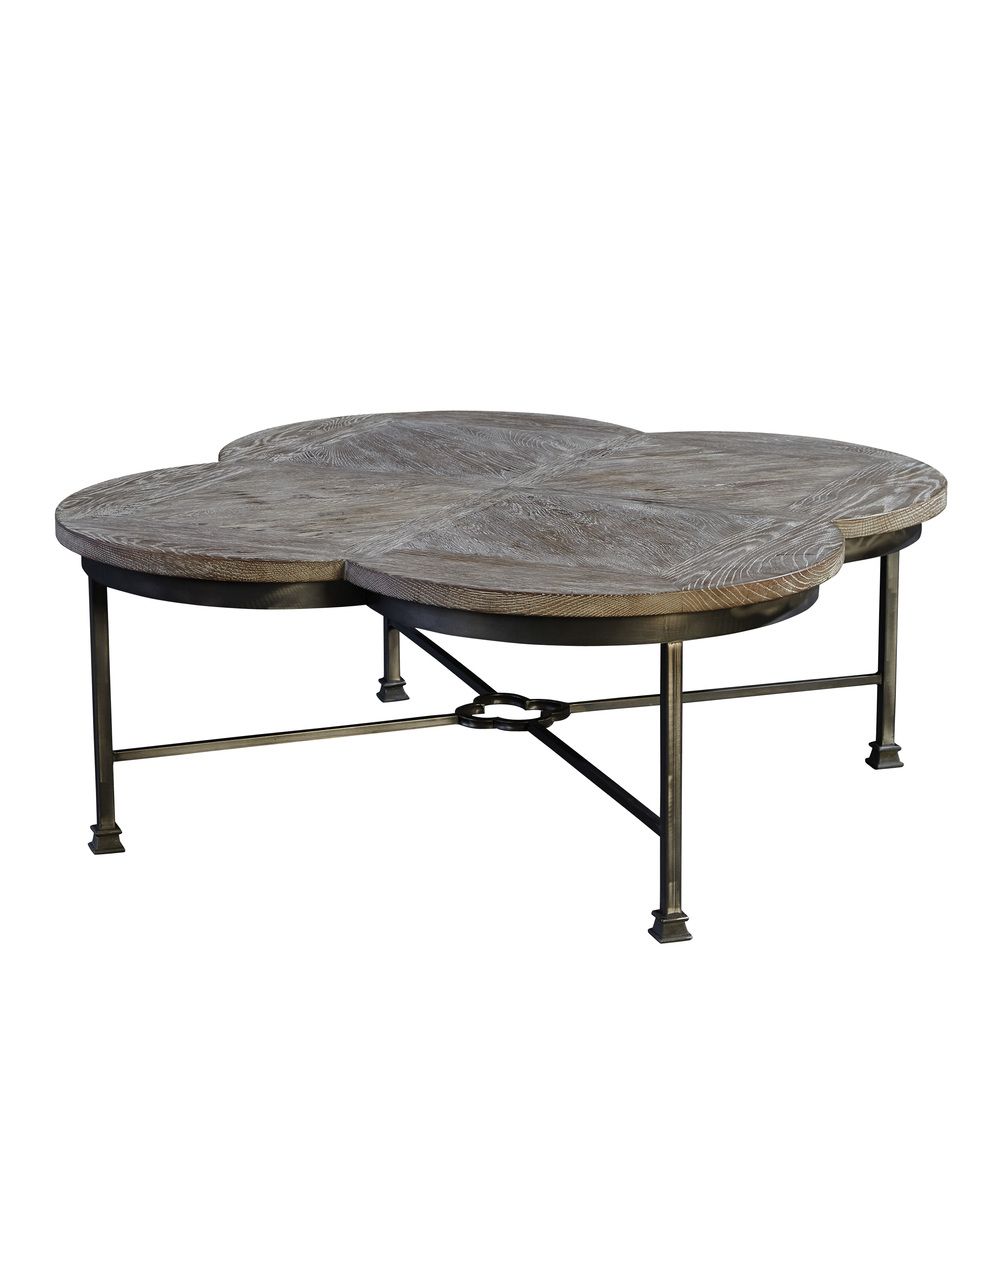 Widely Used Clover Cocktail Tablefurniture Classics Limited (View 12 of 15)